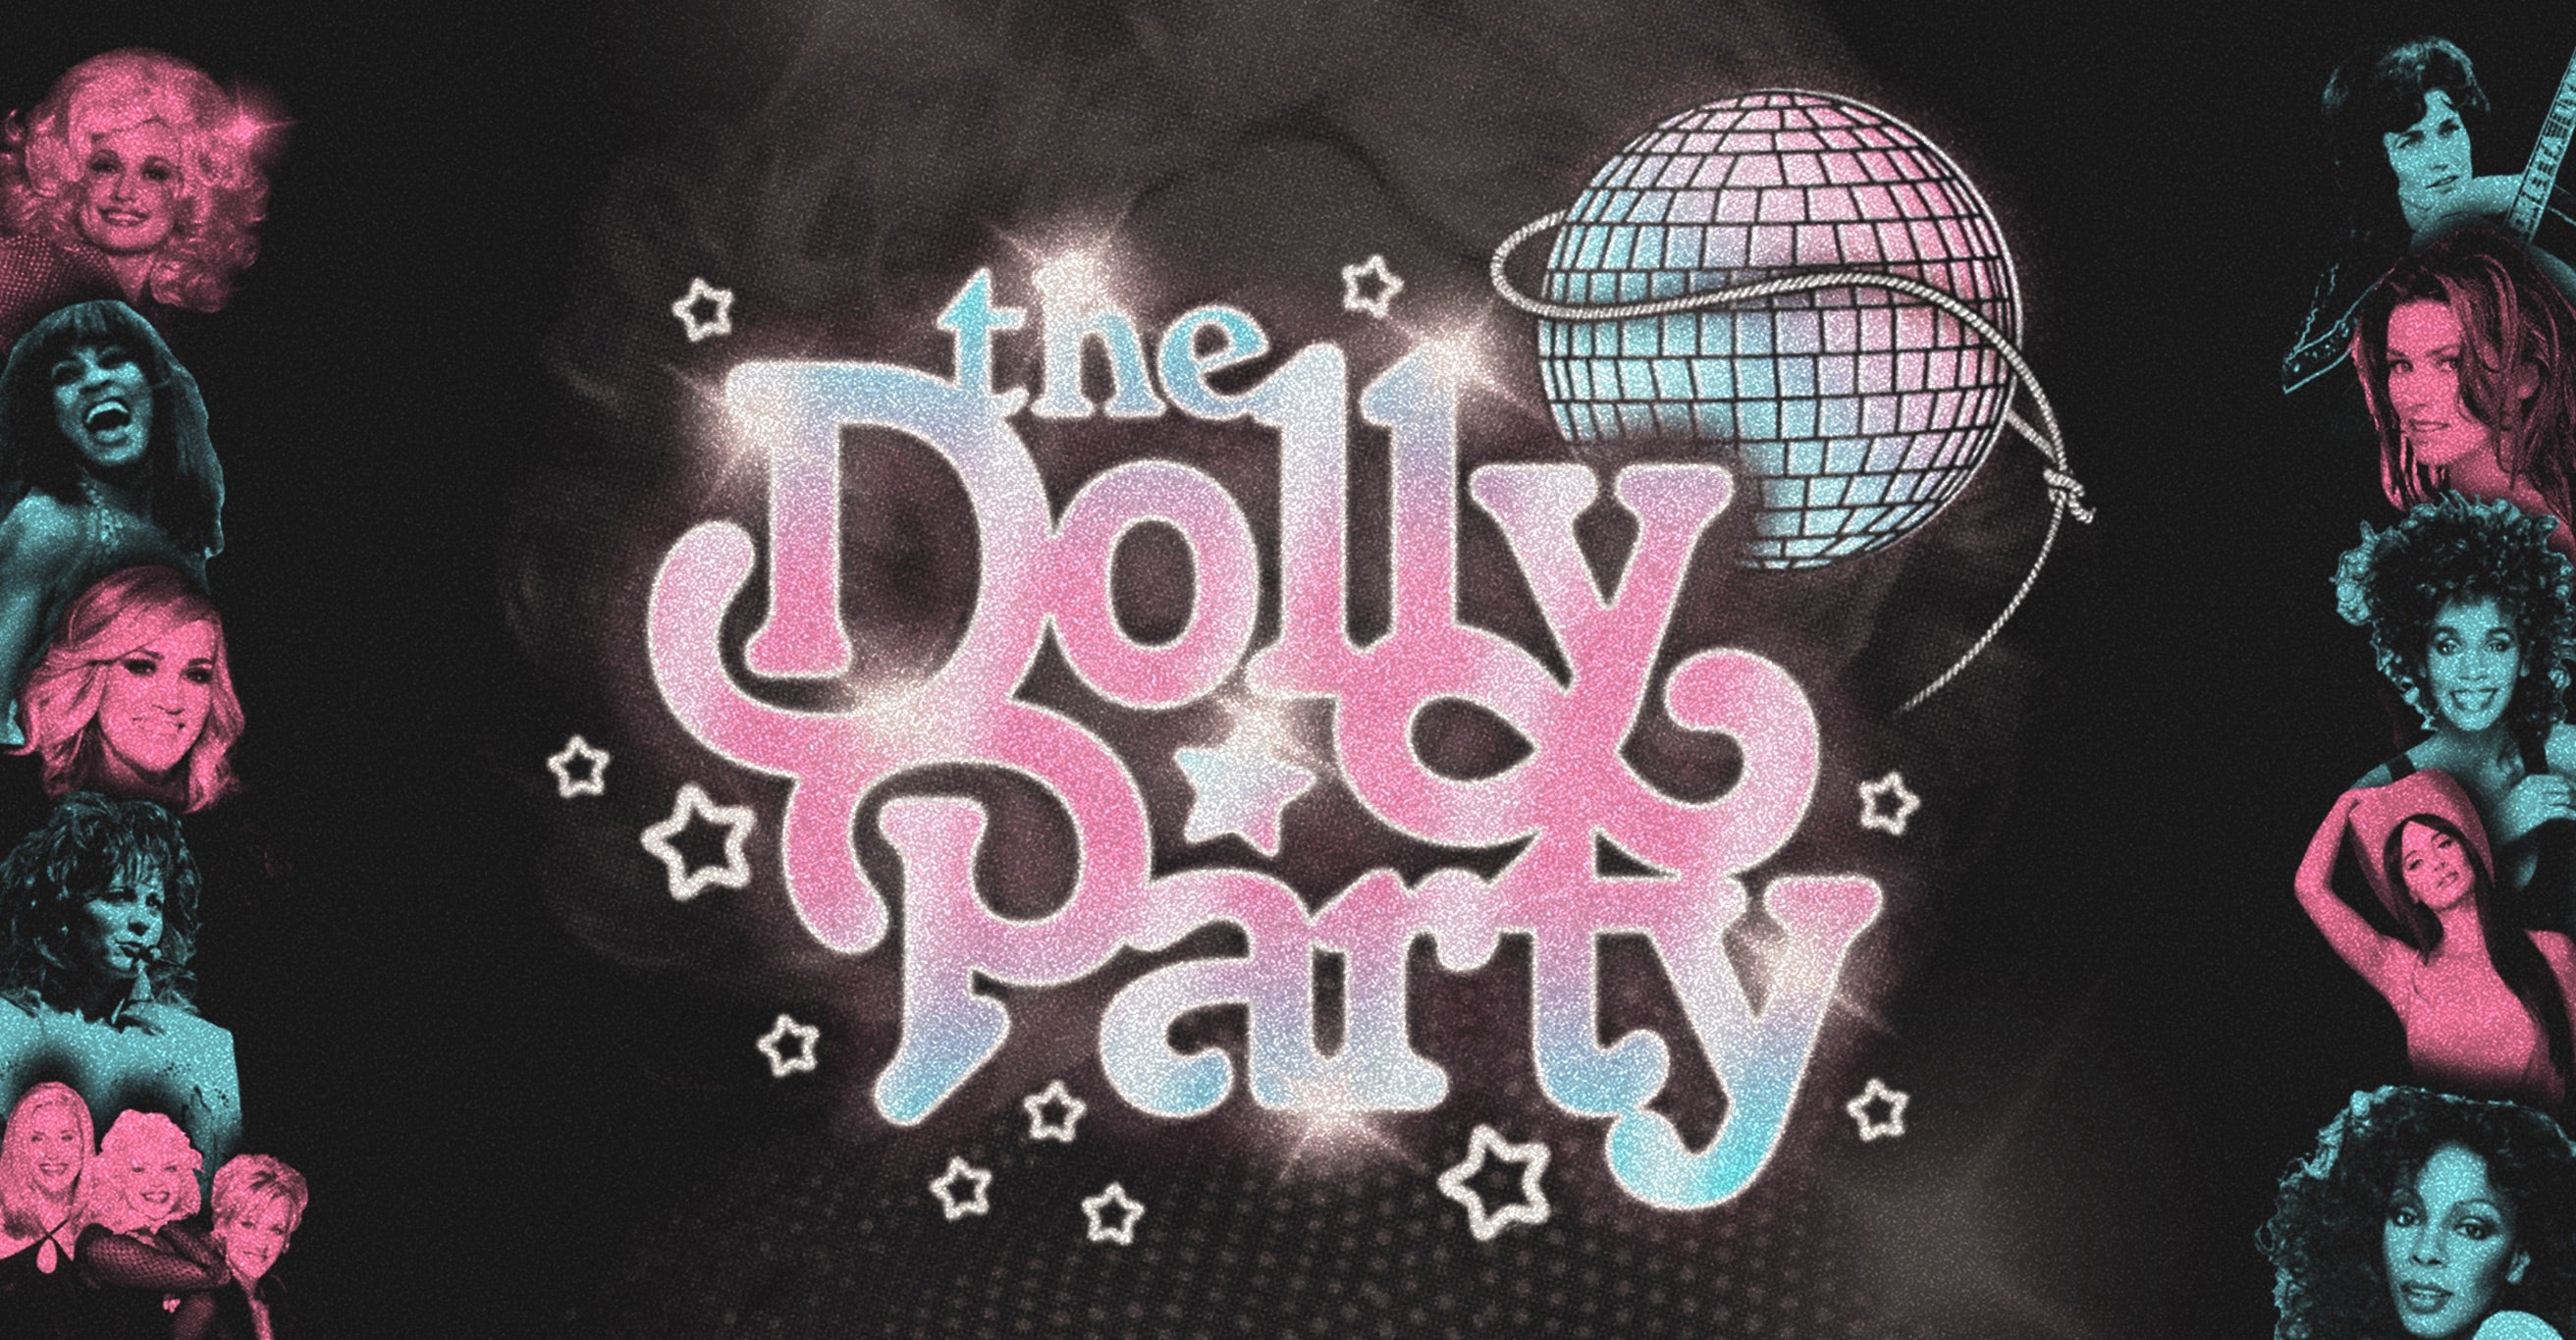 THE DOLLY PARTY The Dolly Parton Inspired Country Diva Dance Party 21+ free pre-sale password